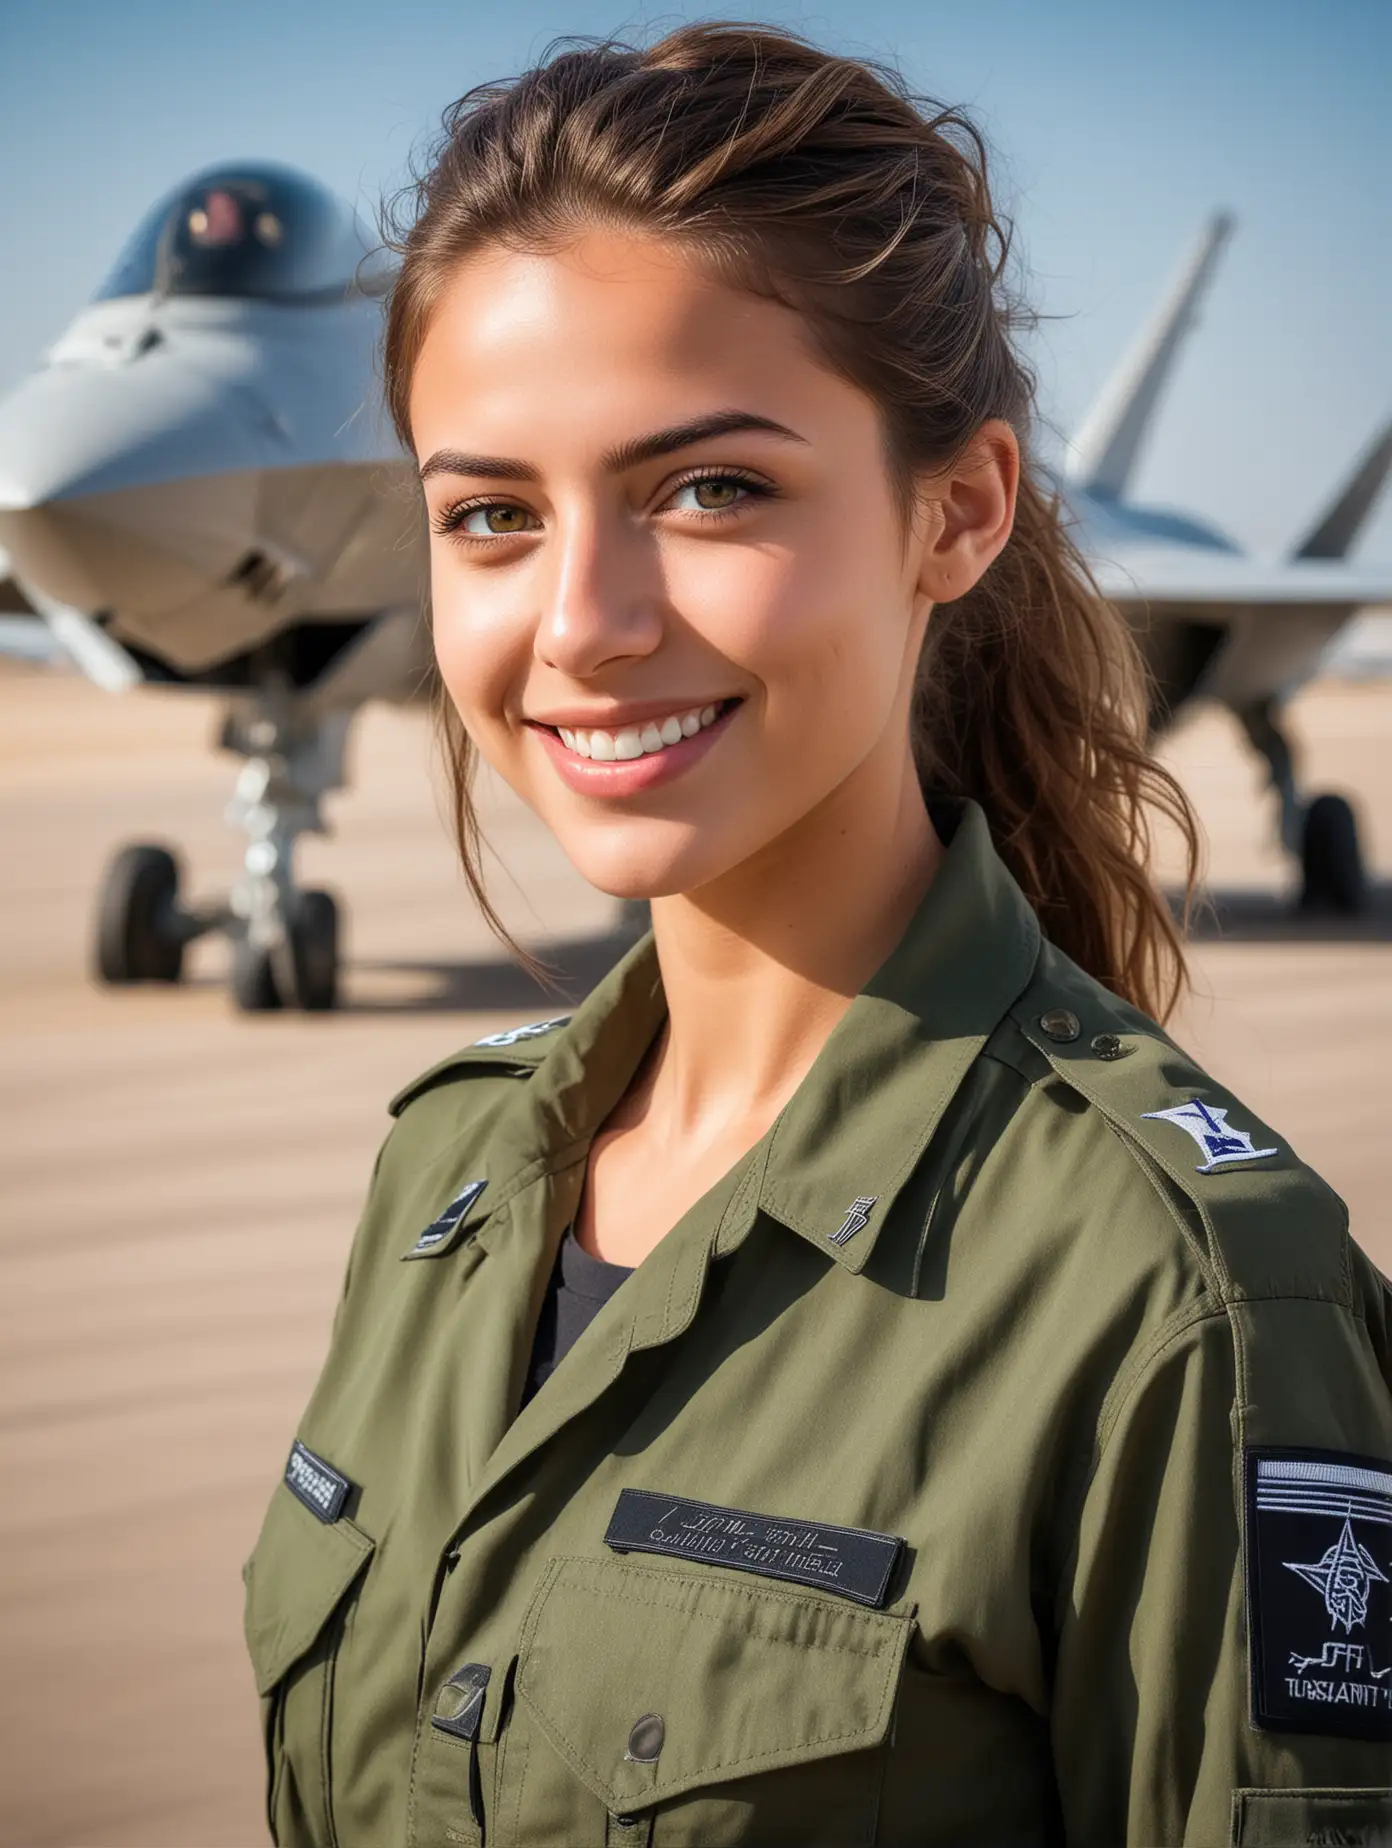 Israeli Girl in Military Uniform Smiling with F22 Fighter Plane Background